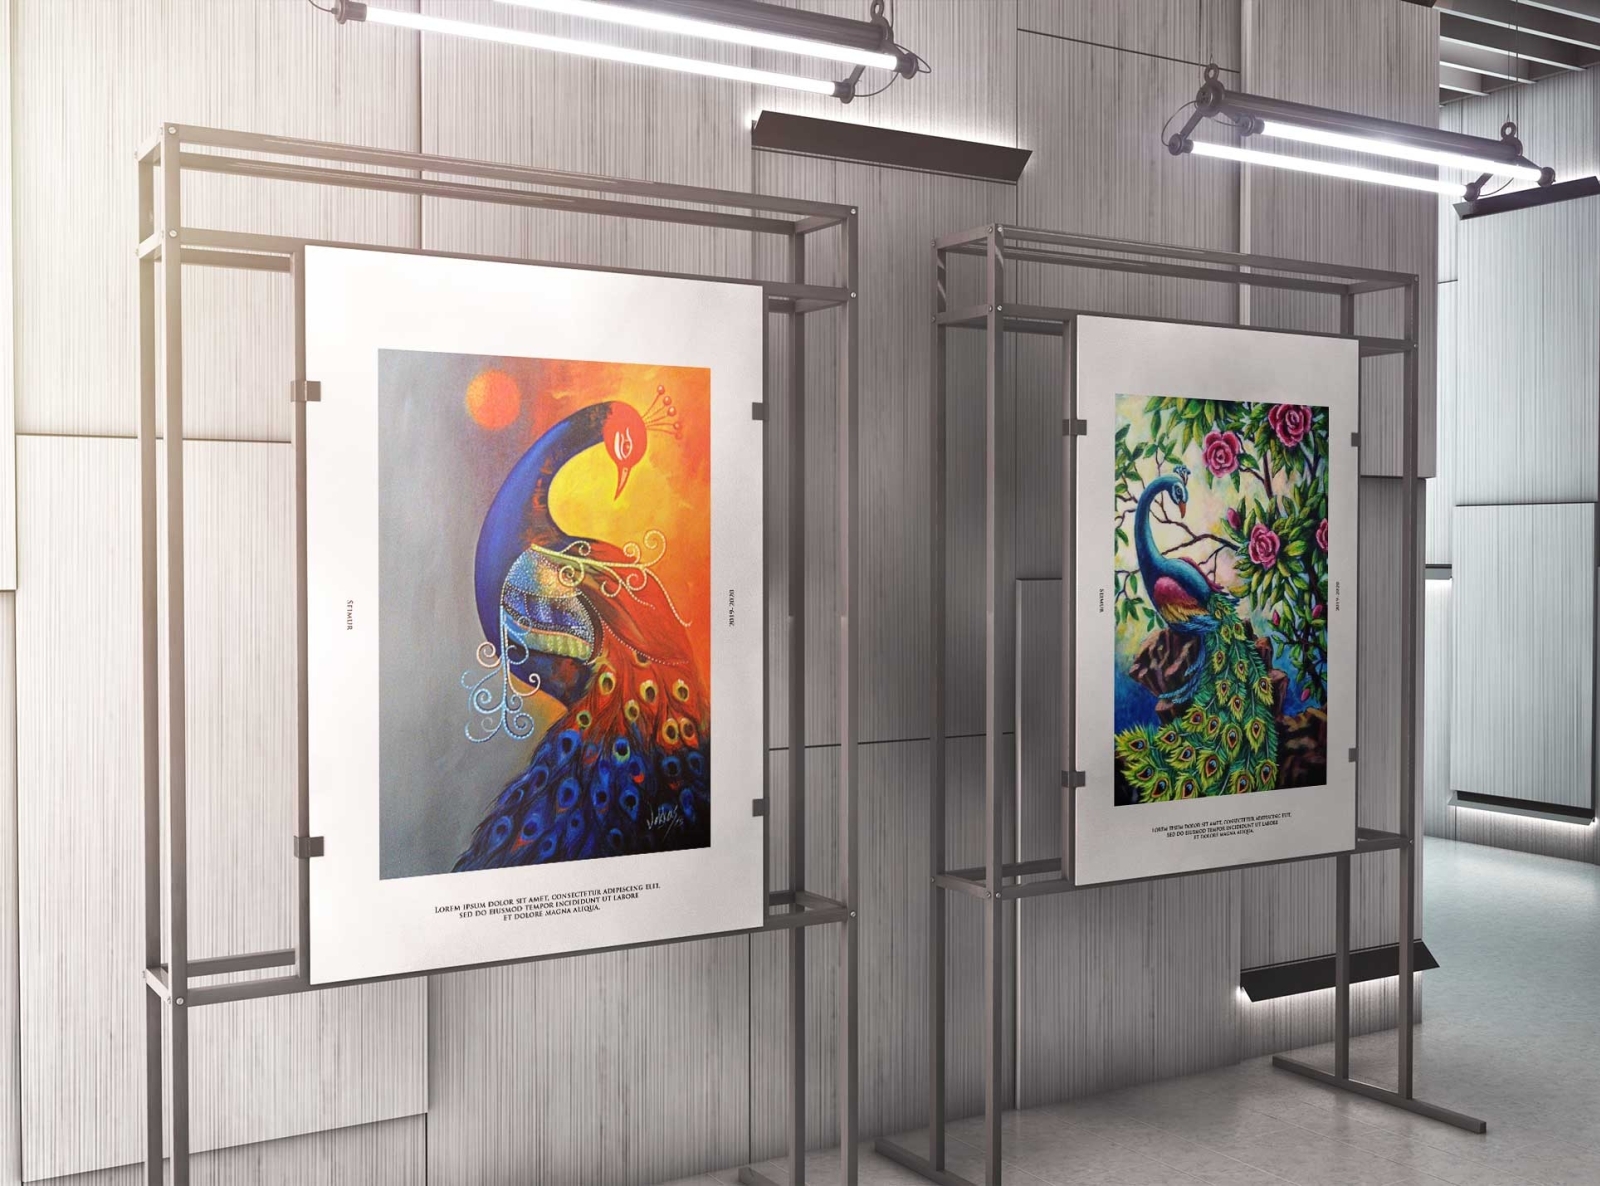 Download Free Canvas Art Gallery PSD Mockup by Anuj Kumar on Dribbble